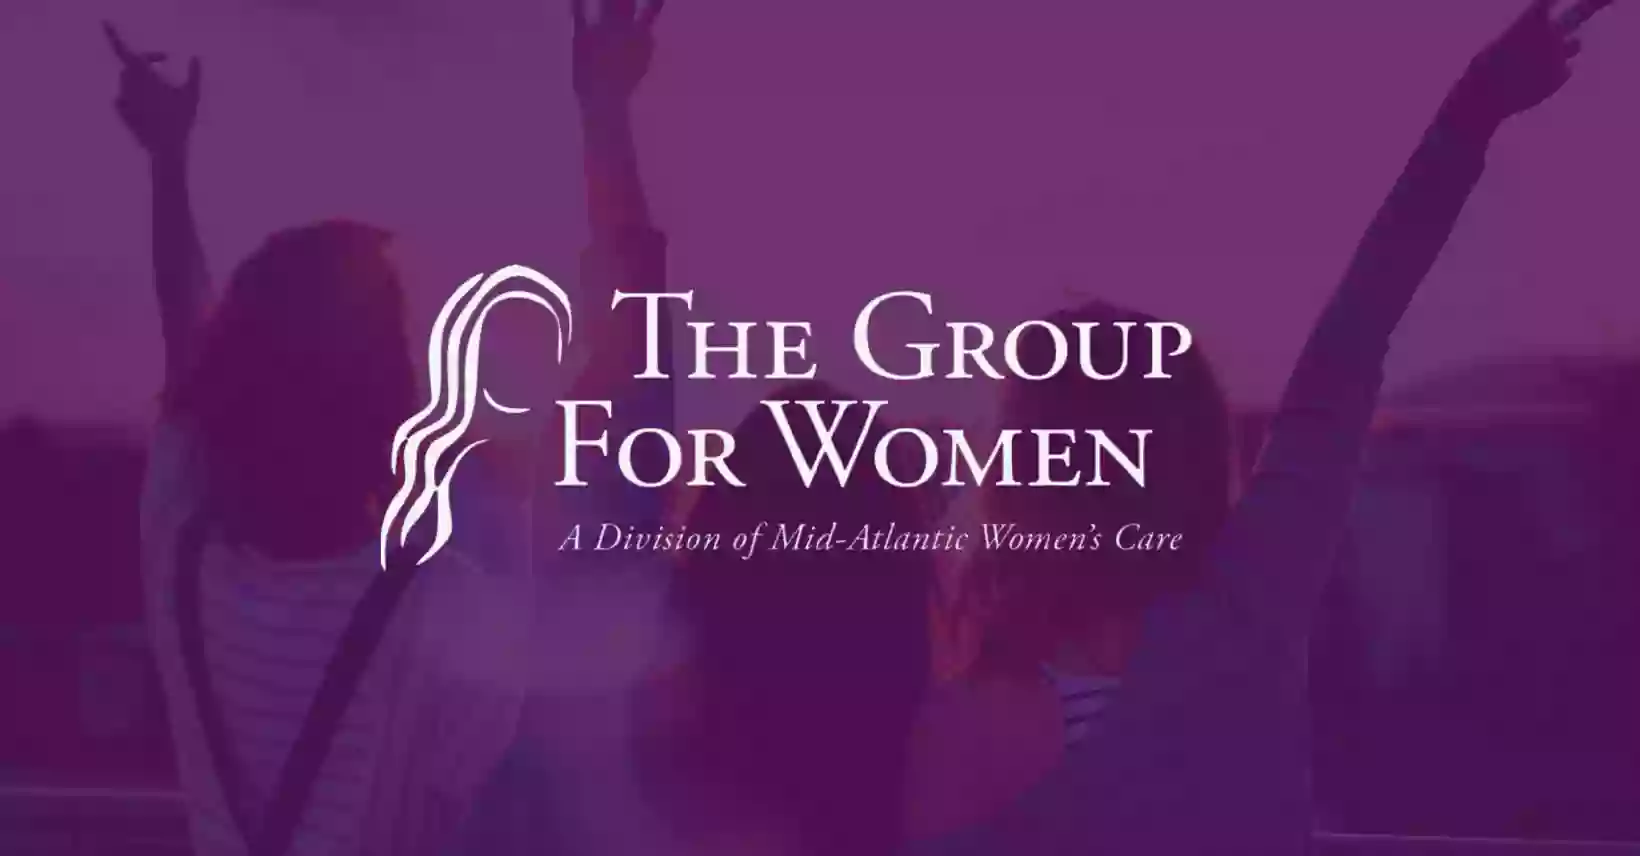 Group For Women: Stockmaster Kimberly J MD